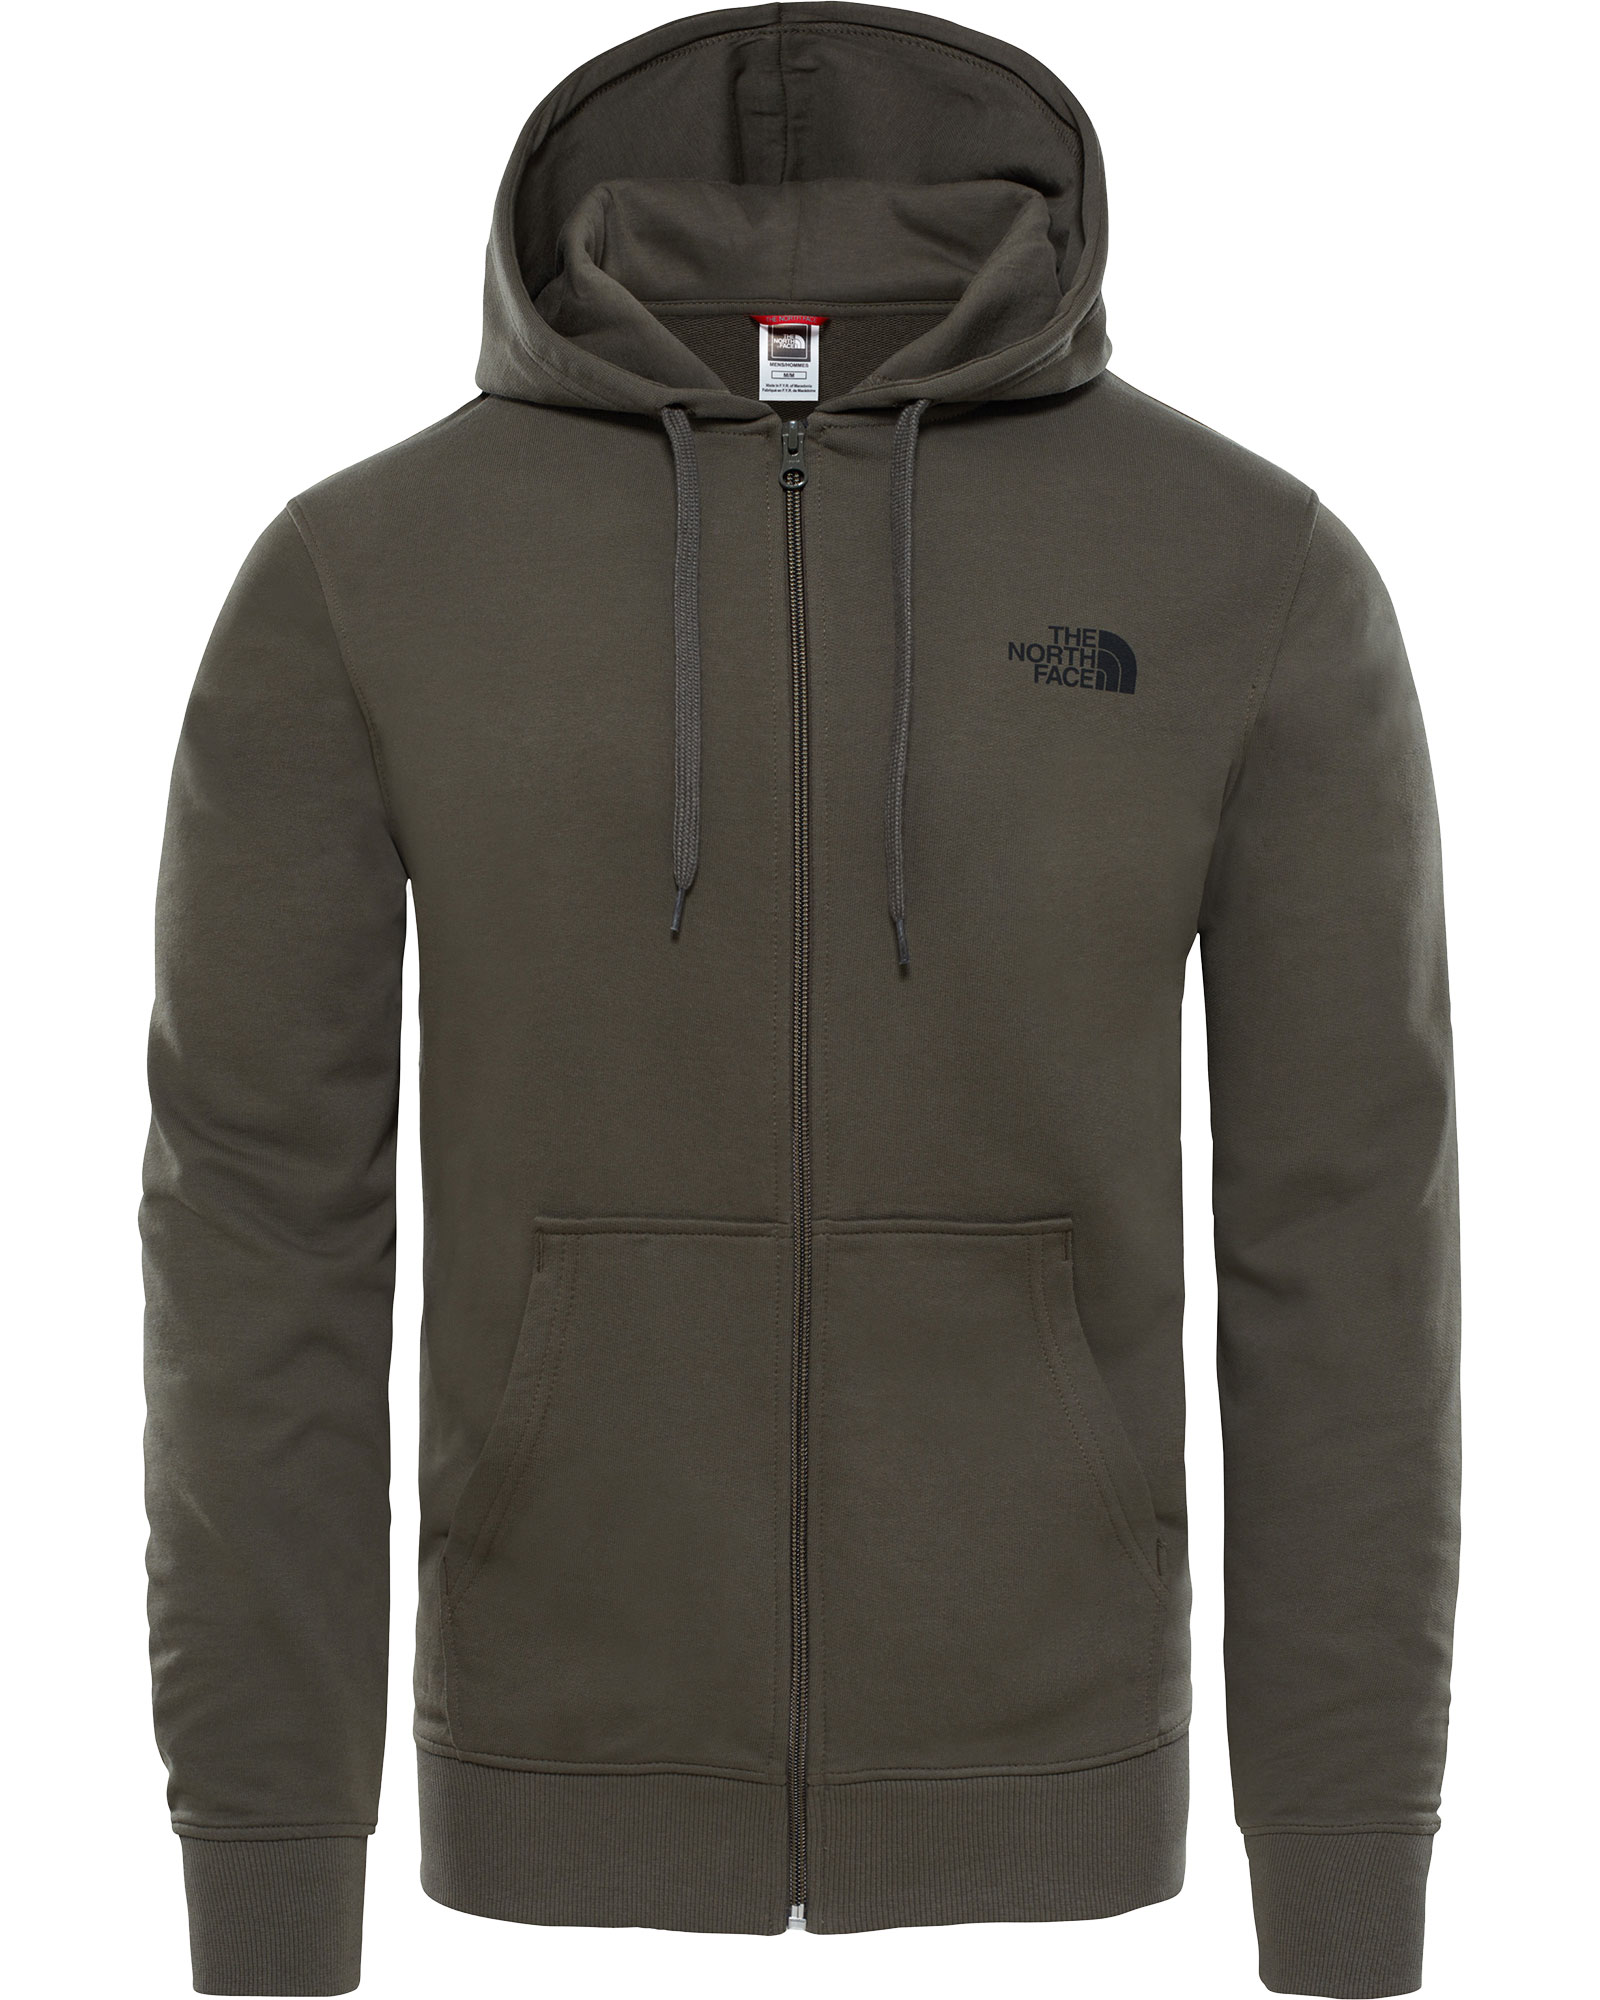 The North Face Open Gate Men’s Full Zip Hoodie - New Taupe Green L